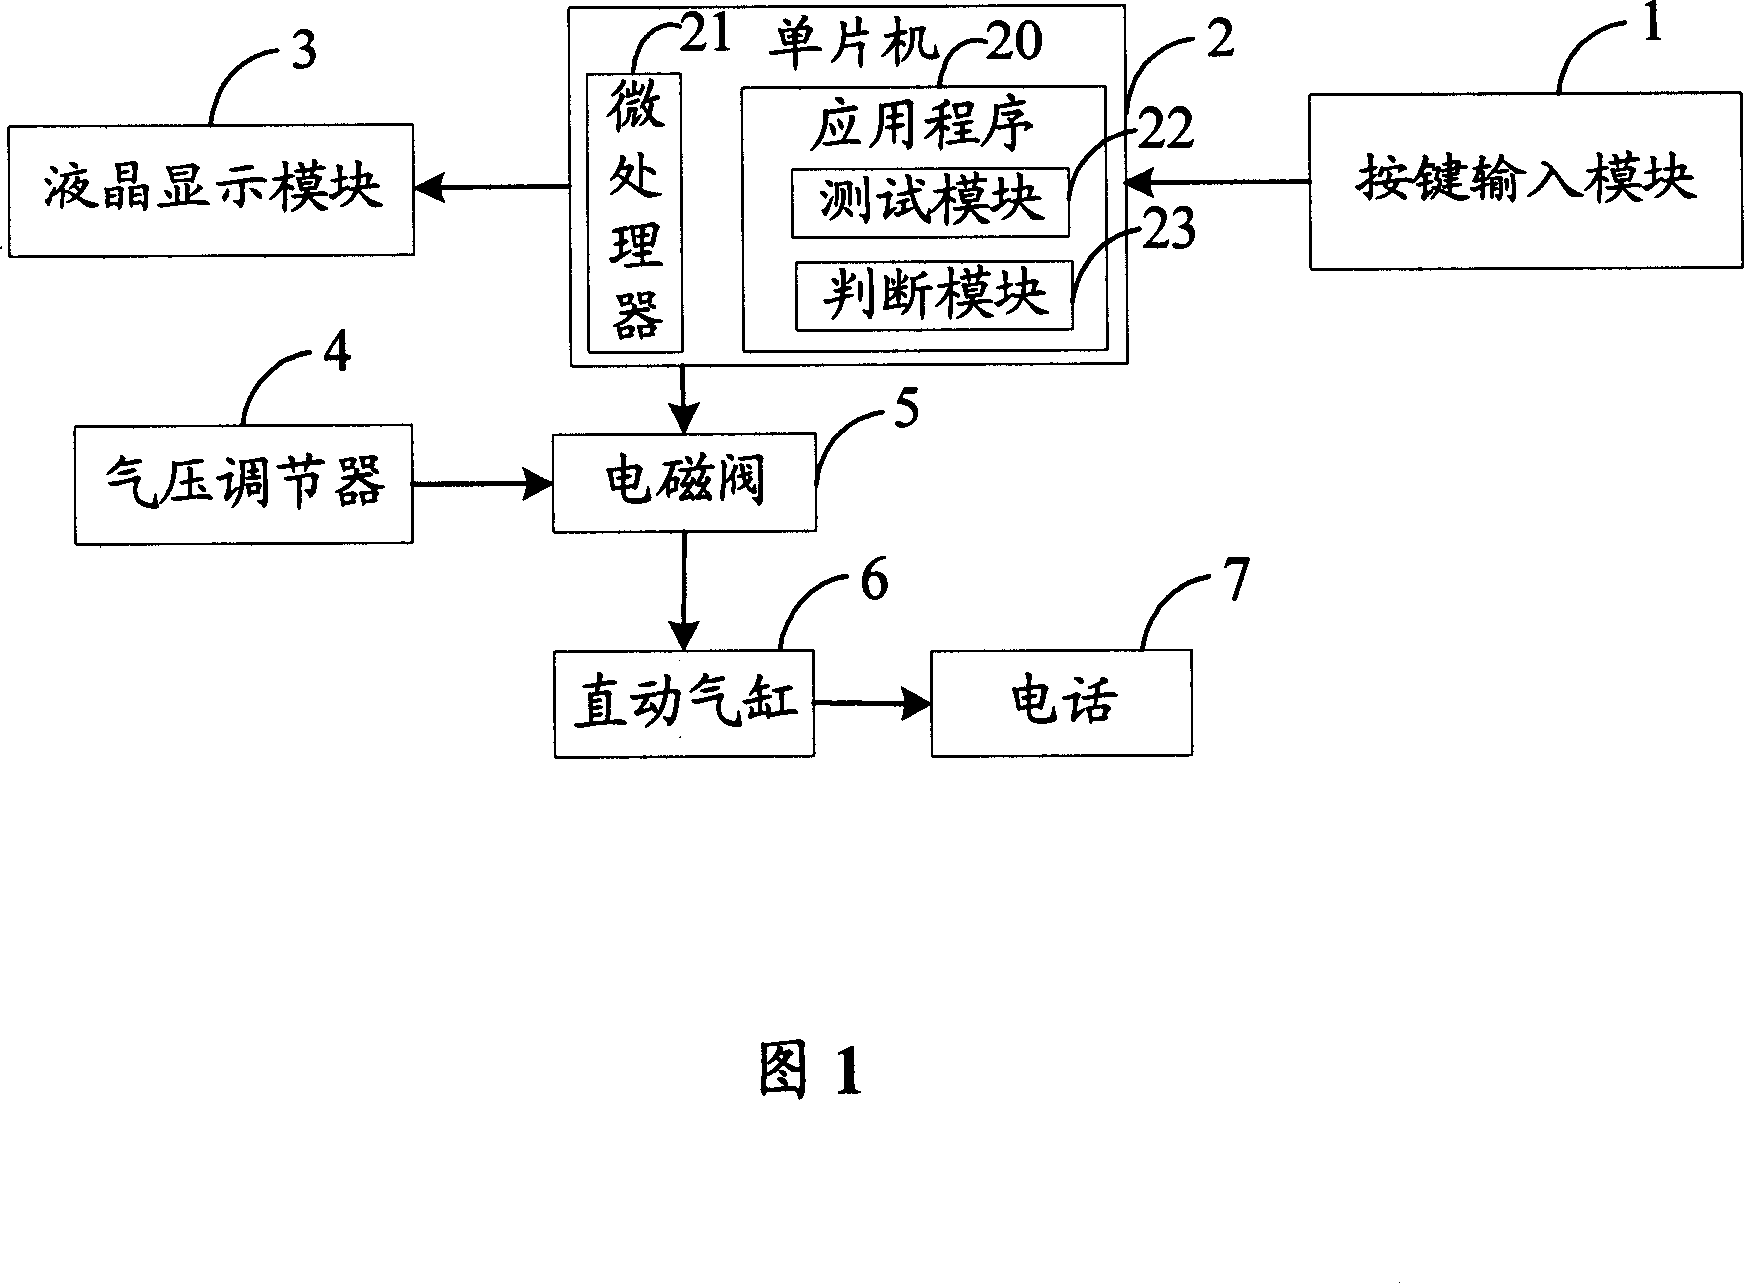 Push-button service-life detection system and method